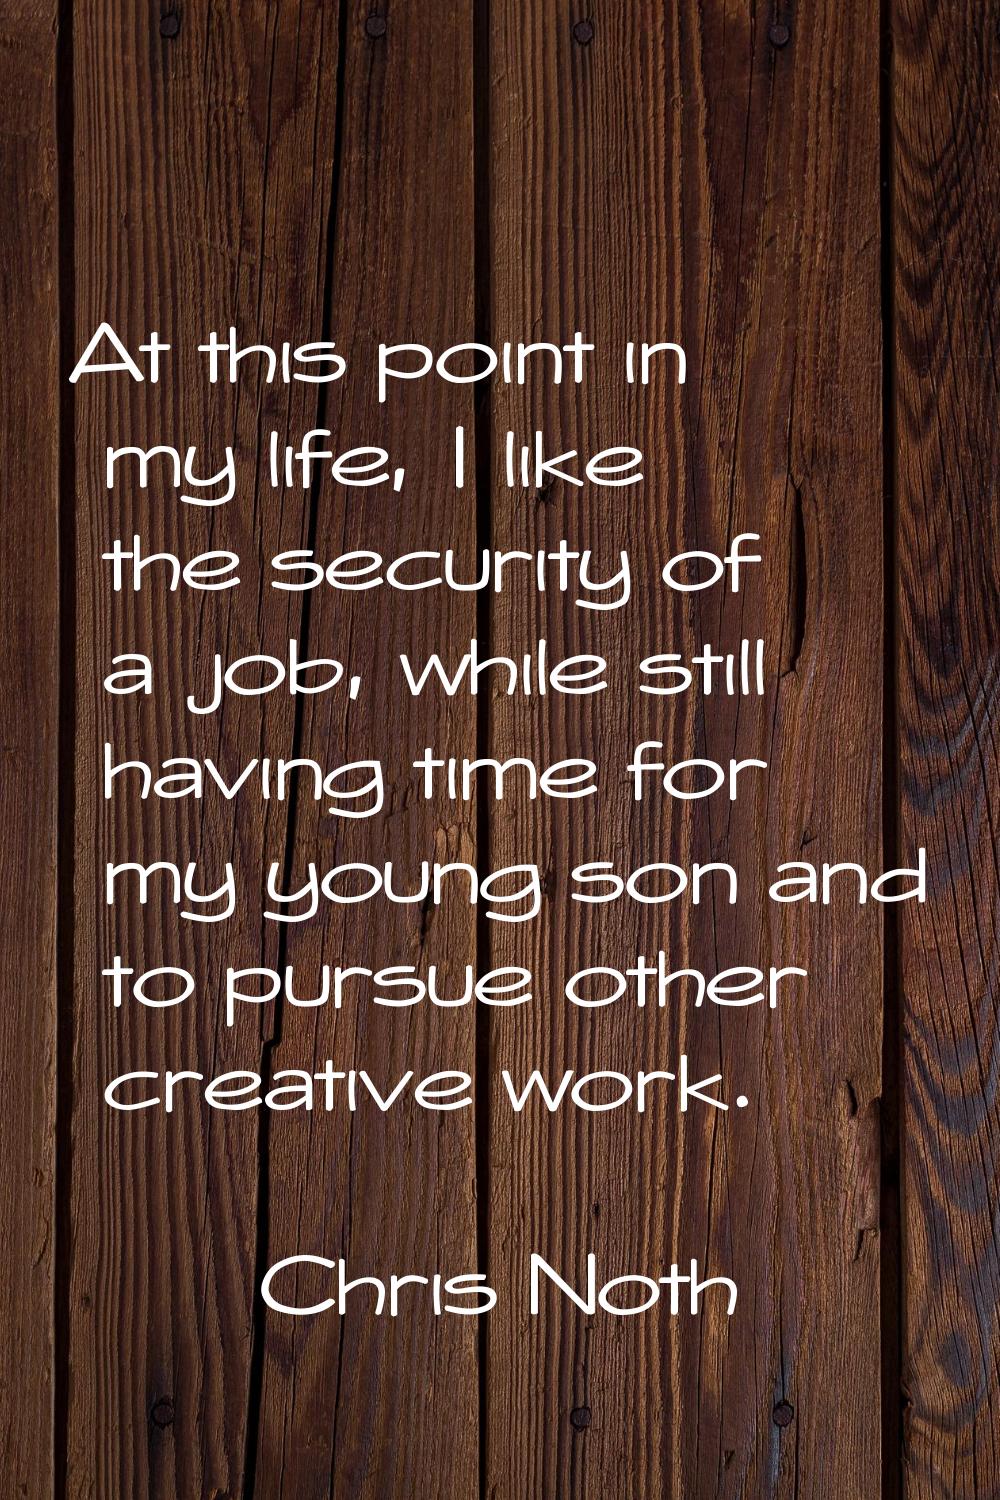 At this point in my life, I like the security of a job, while still having time for my young son an